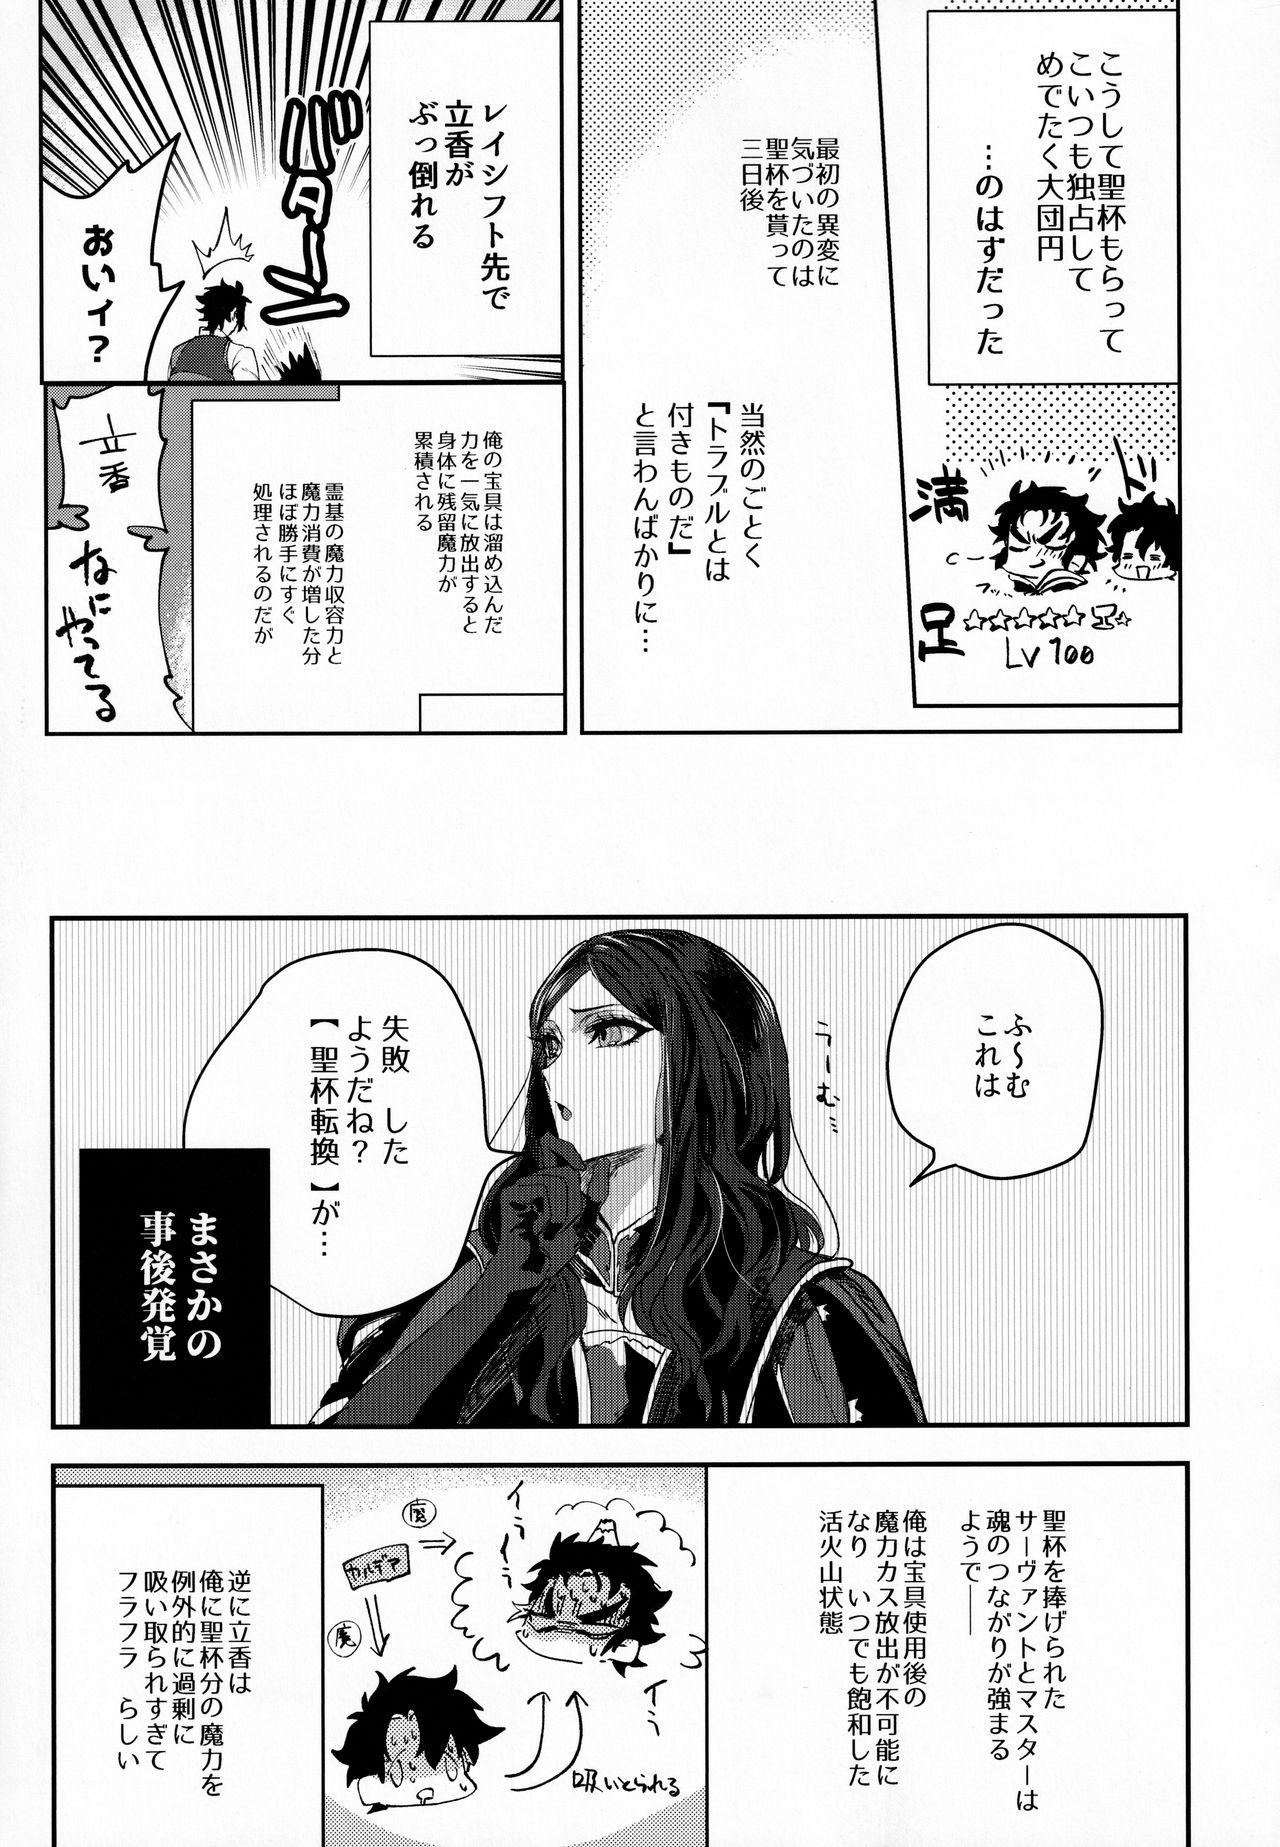 Big Ass 耽溺と熱 - Fate grand order Time - Page 12